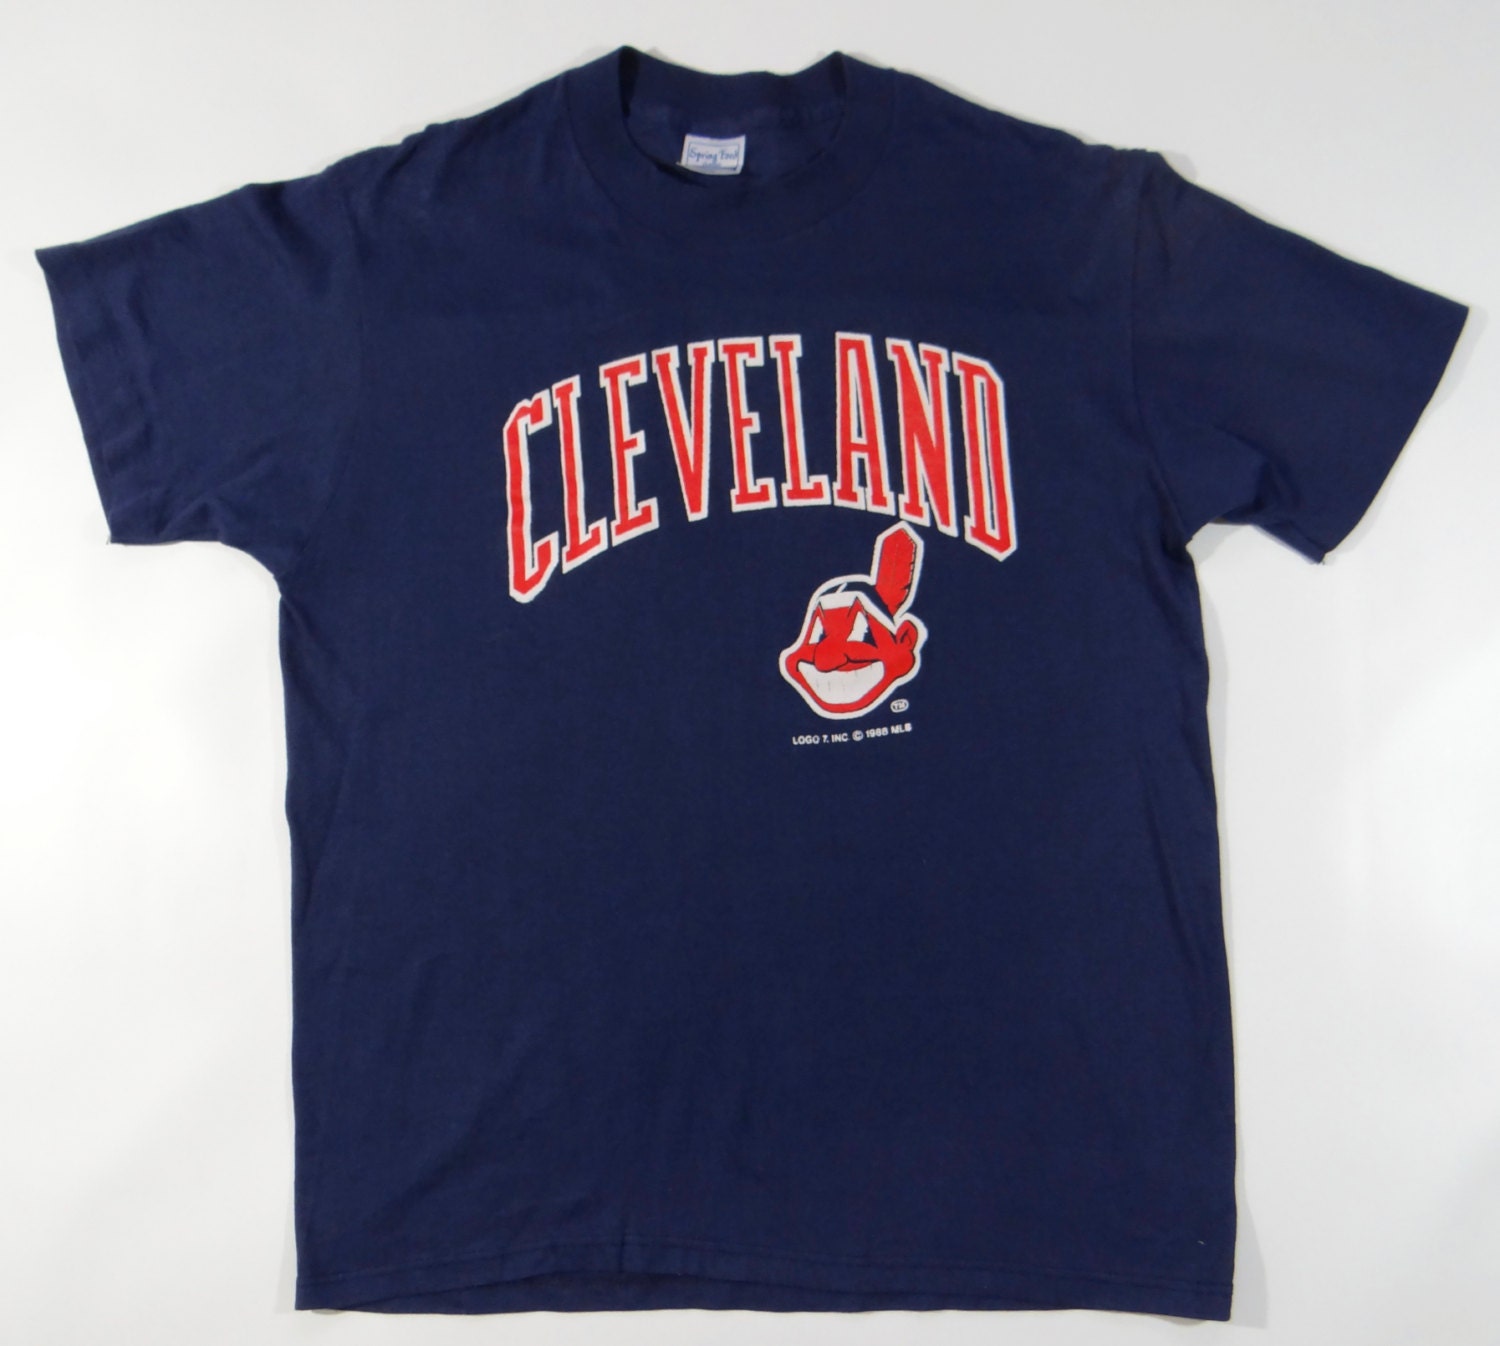 Vintage 1988 CLEVELAND INDIANS Shirt Classic by NicFitVintage